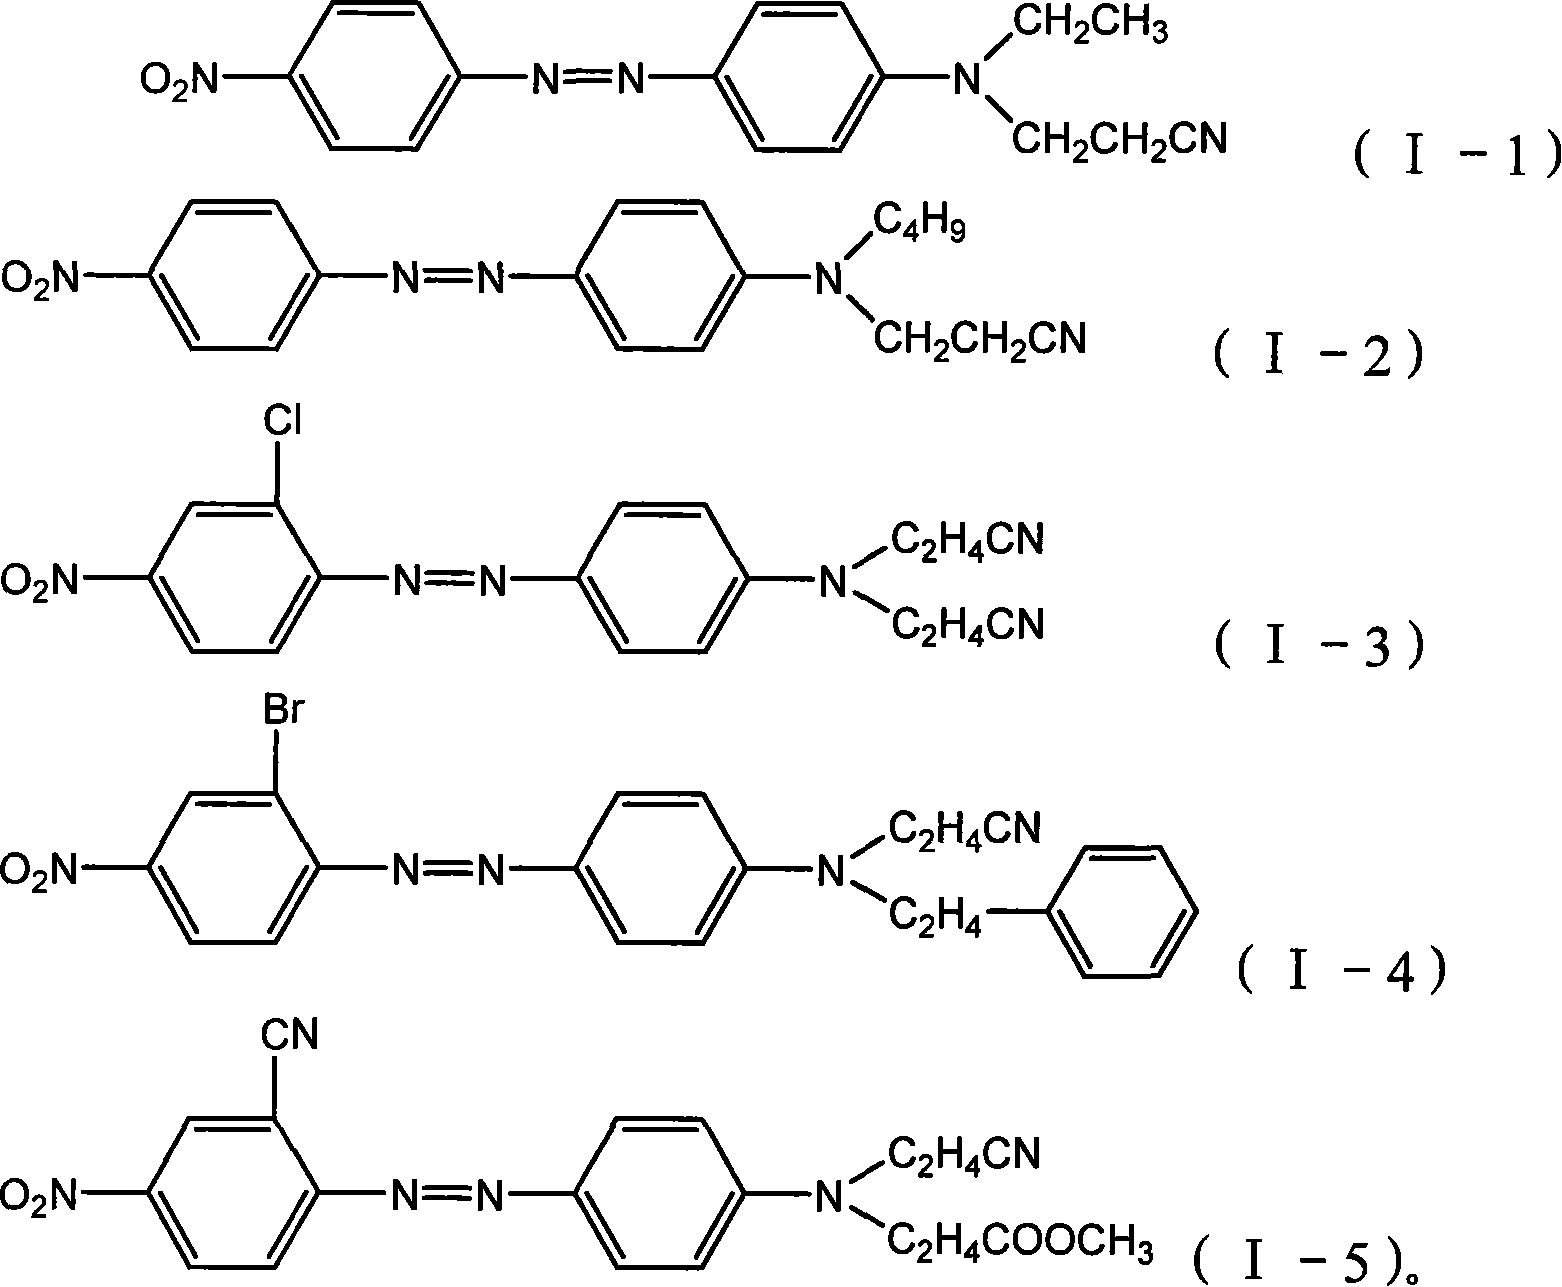 Ccomposition of dispersed yellow dye